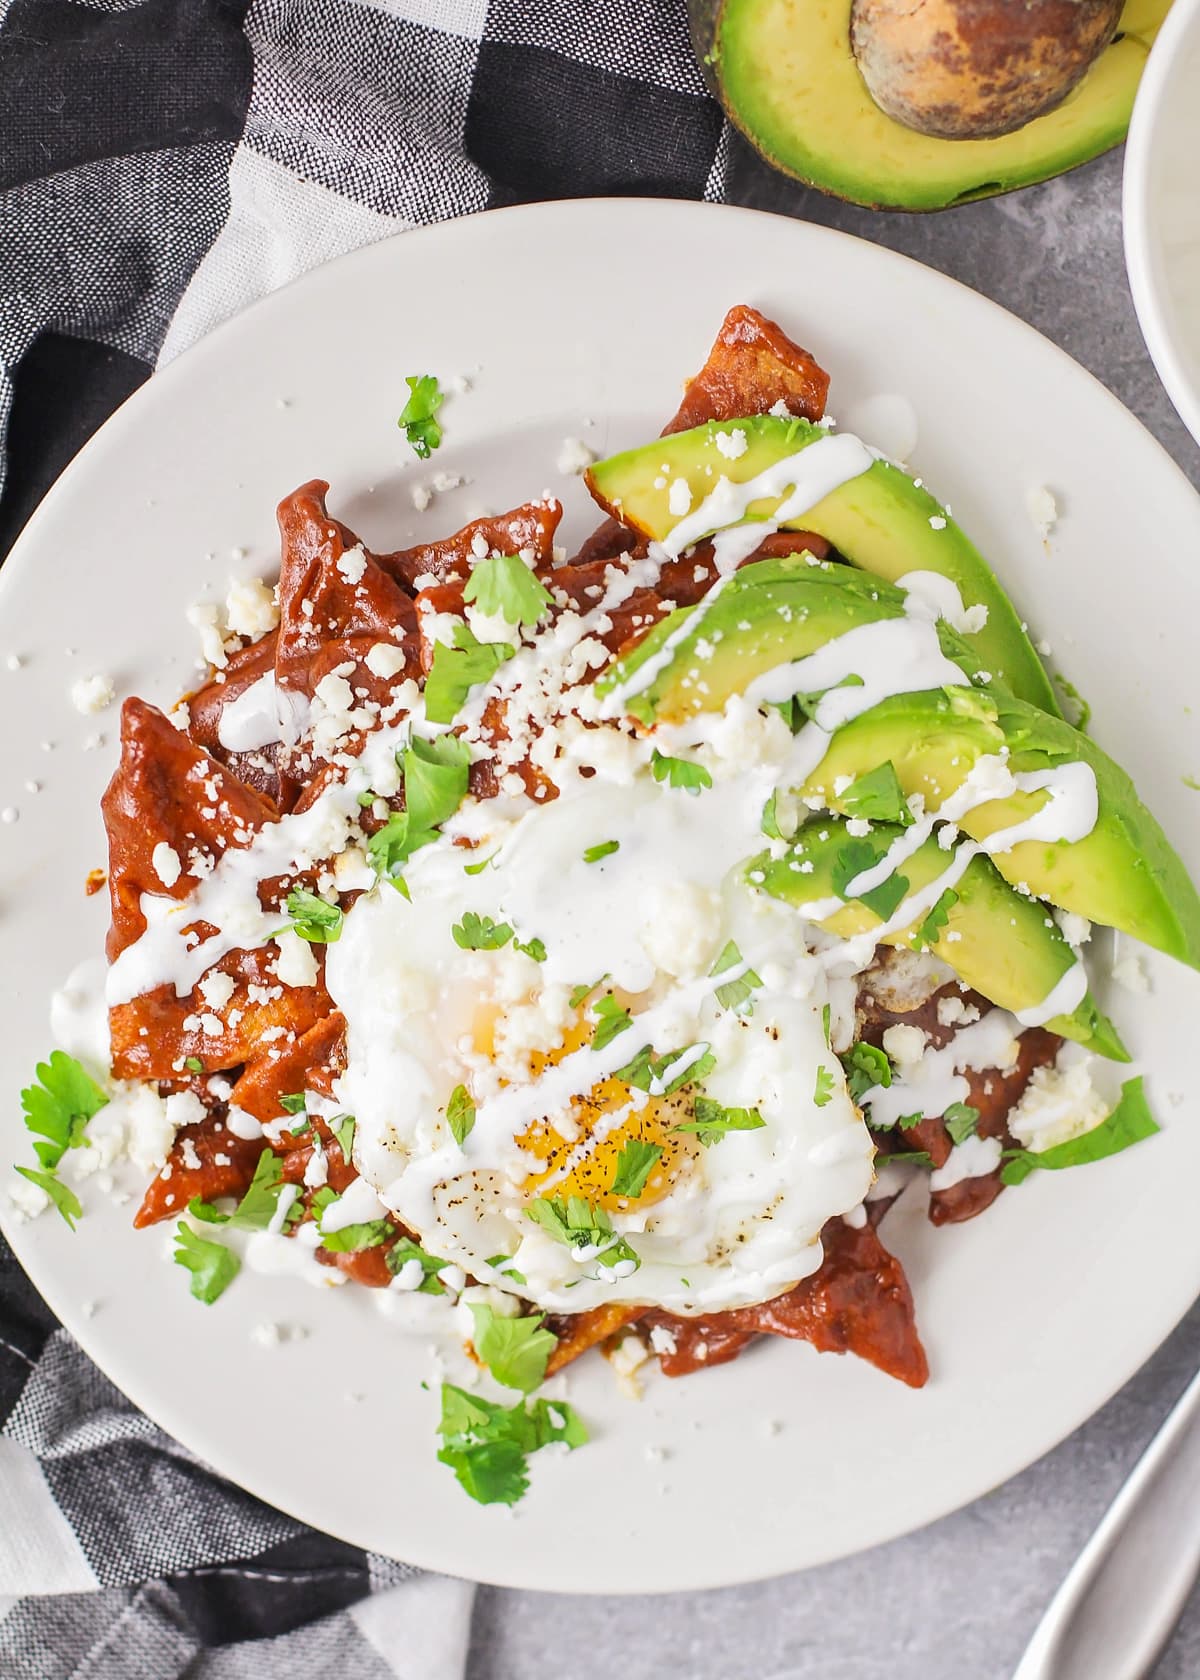 Chilaquiles topped with a fried egg, avocado slices, and cotija cheese.